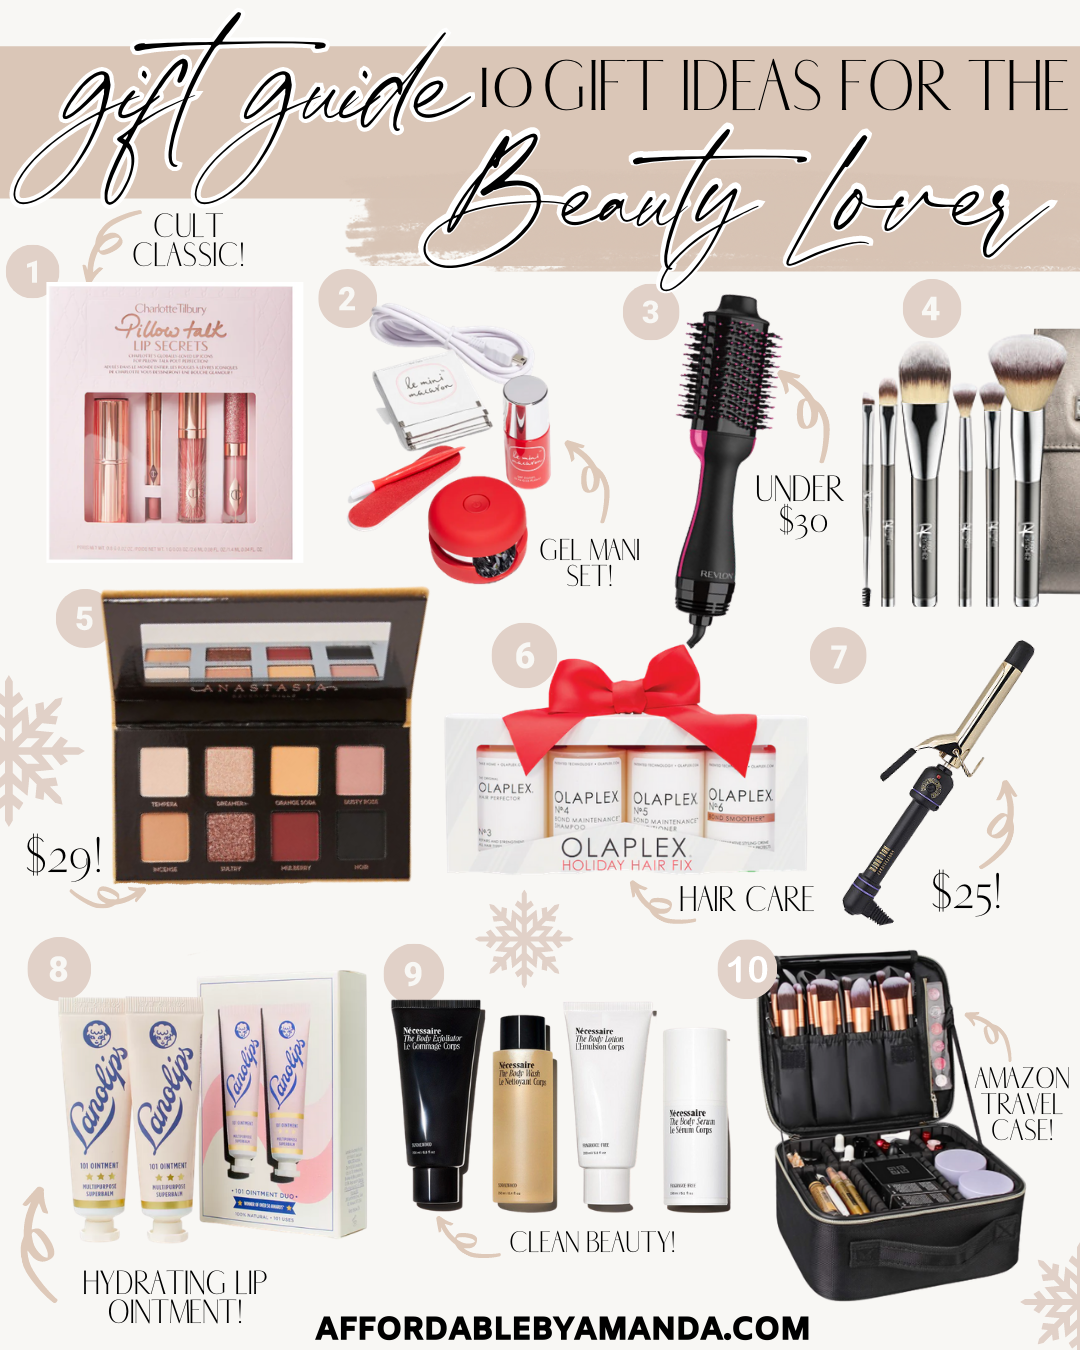 10 Gift Ideas for Beauty Lovers | Affordable by Amanda